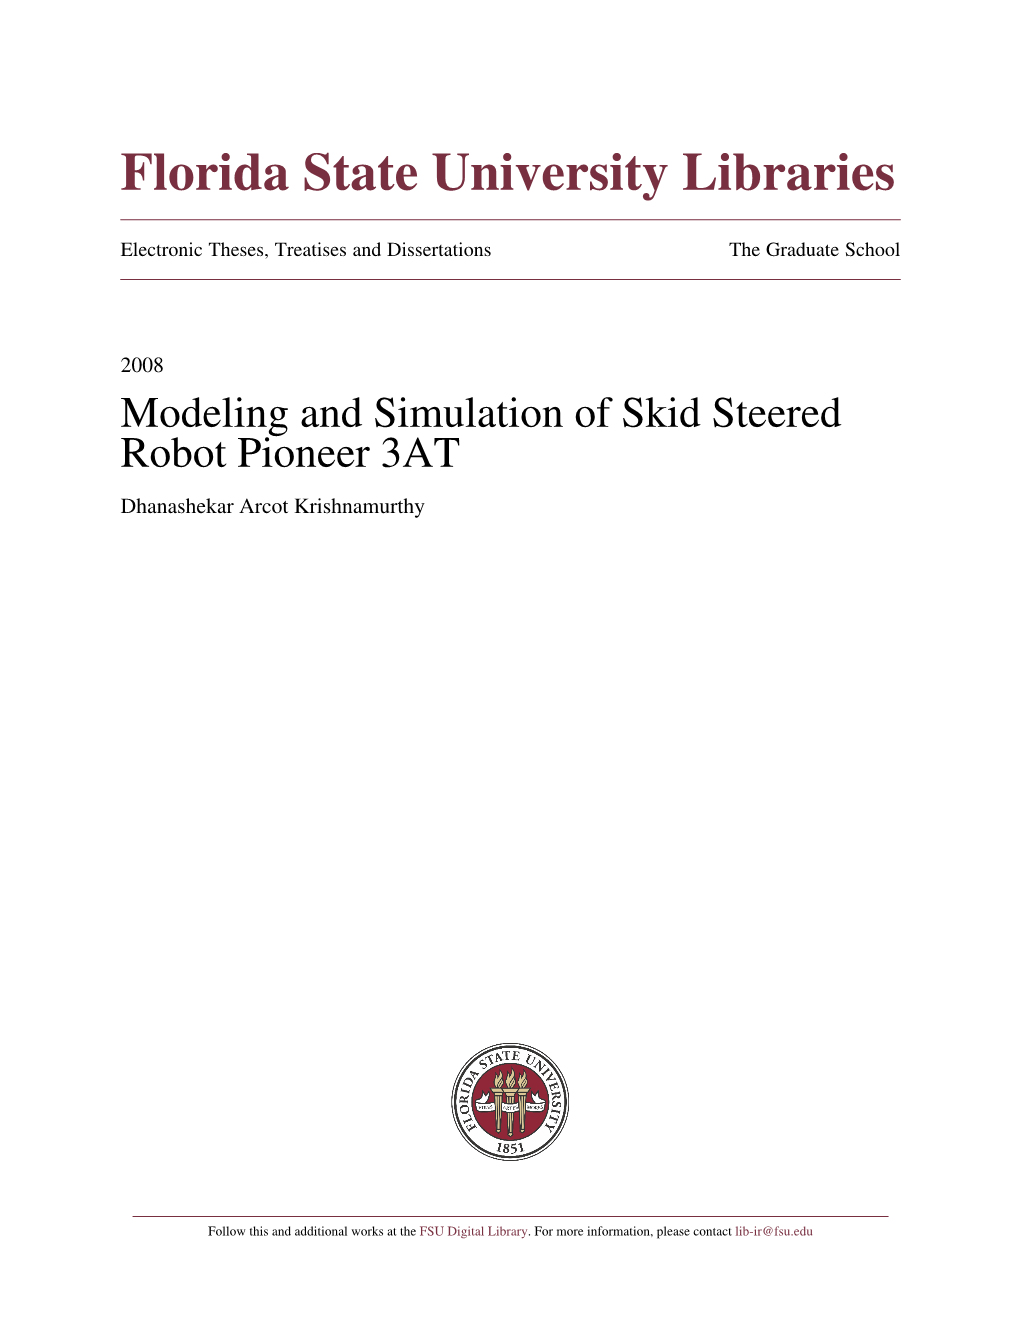 Modeling and Simulation of Skid Steered Robot Pioneer-3AT